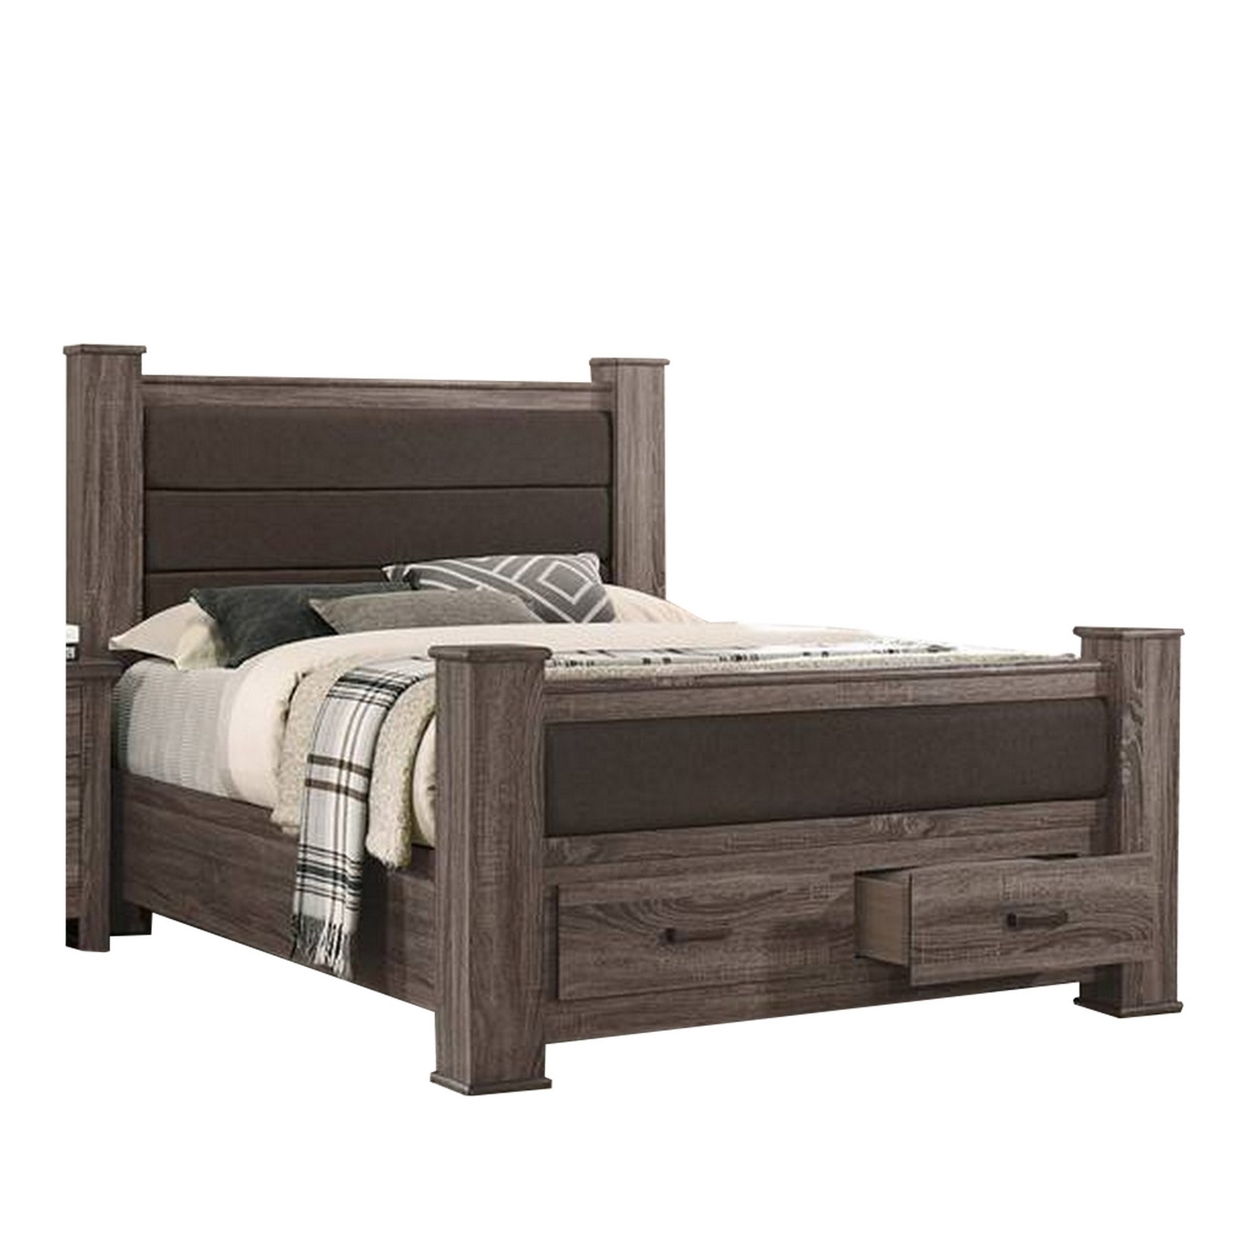 Fort Classic Queen Sized Bed With 2 Drawers, Upholstered Panel, Oak Gray- Saltoro Sherpi